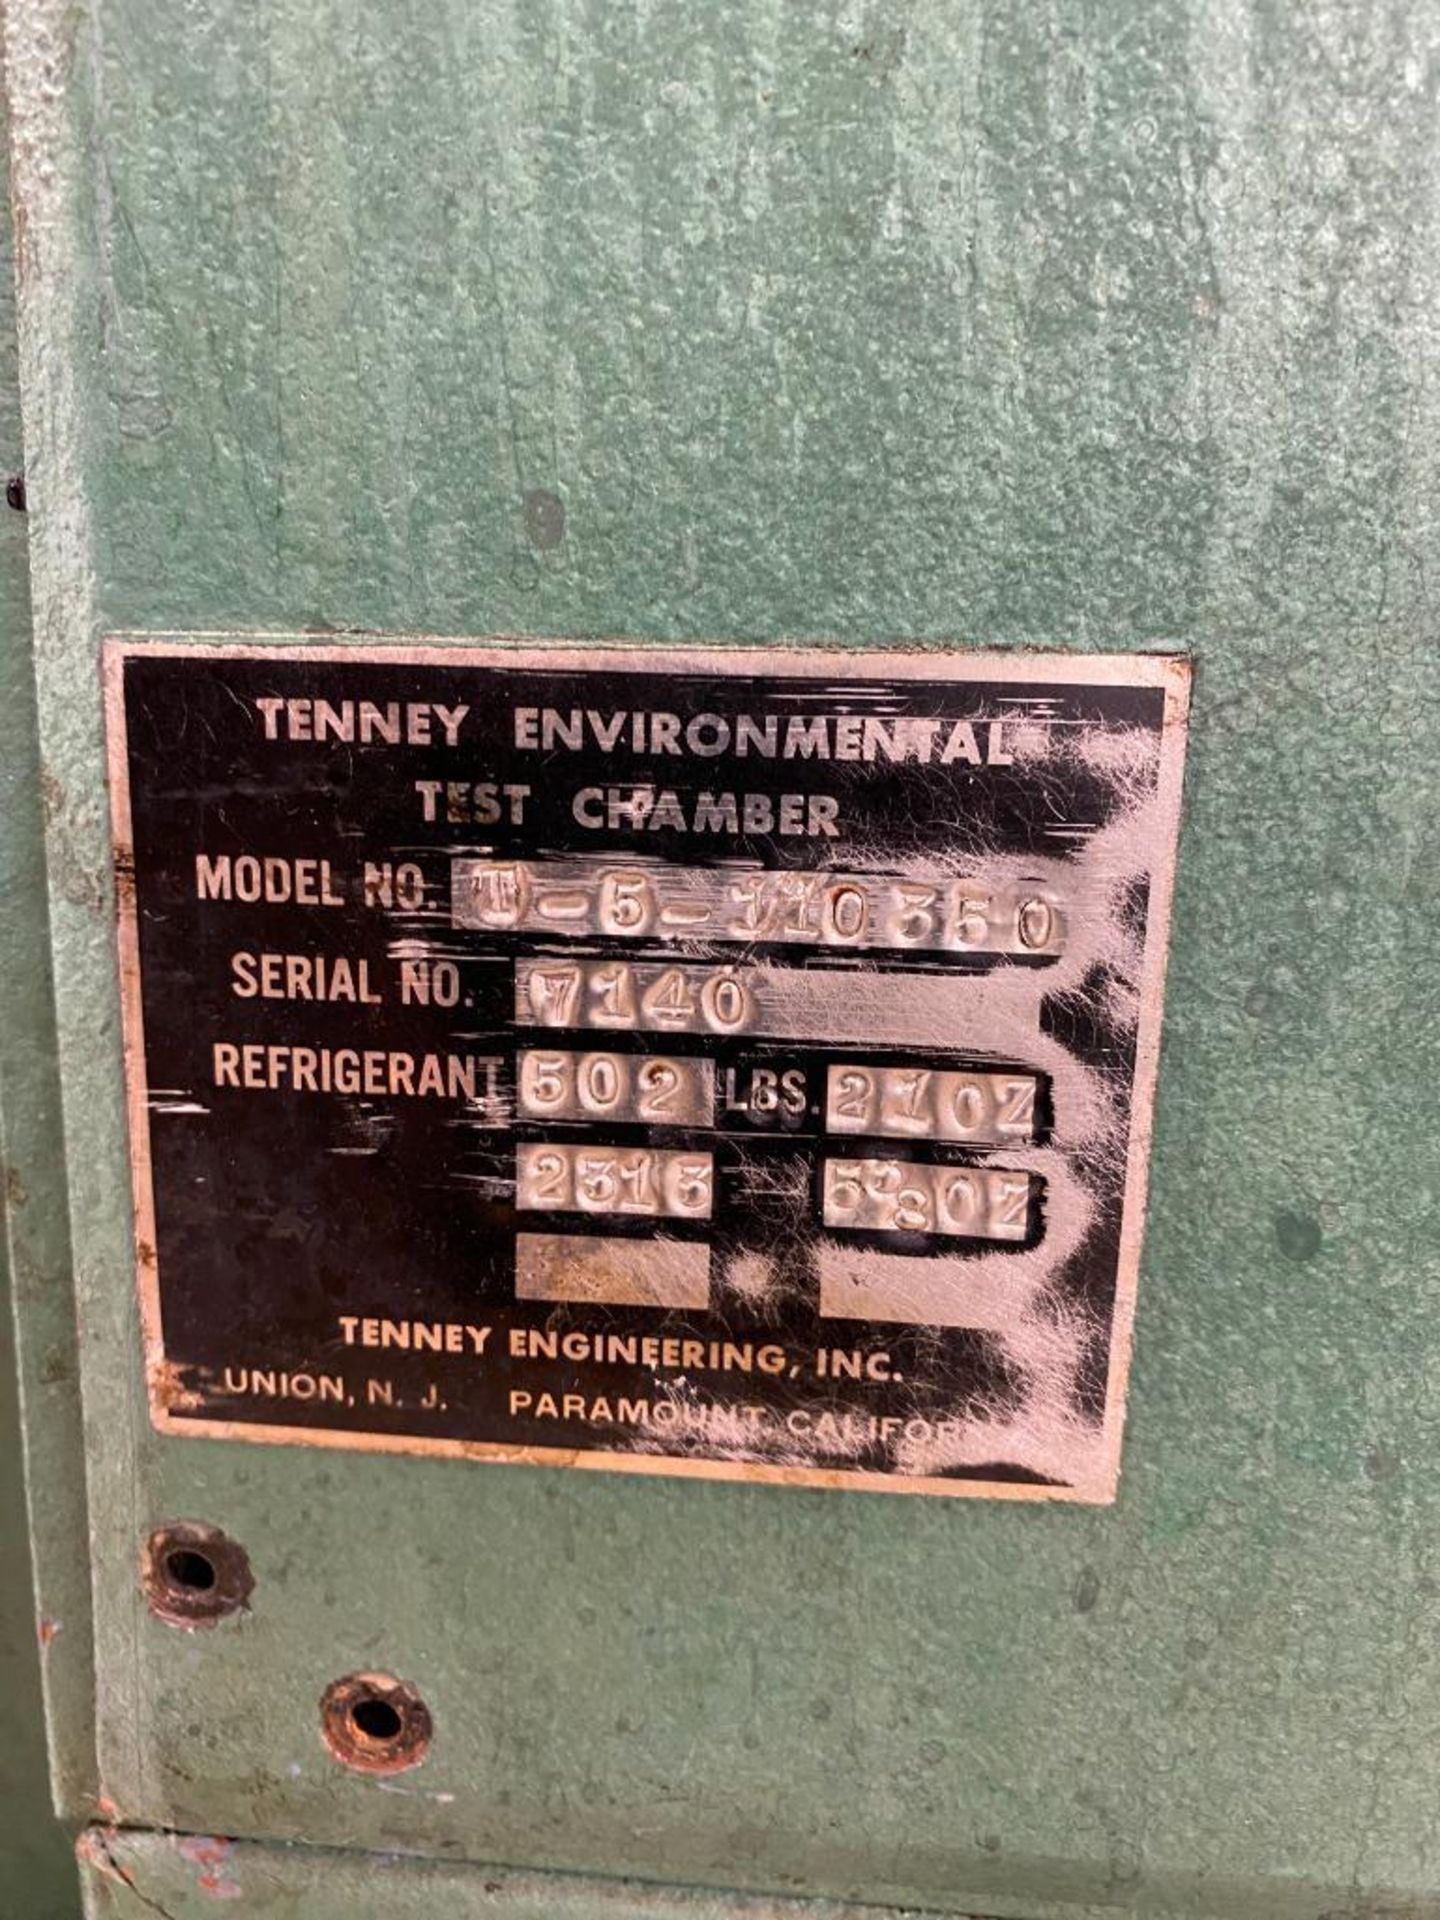 Tenney Environmental Test Chamber, Model T-5-110350, S/N 7140, Cooler & Oven - Image 5 of 5